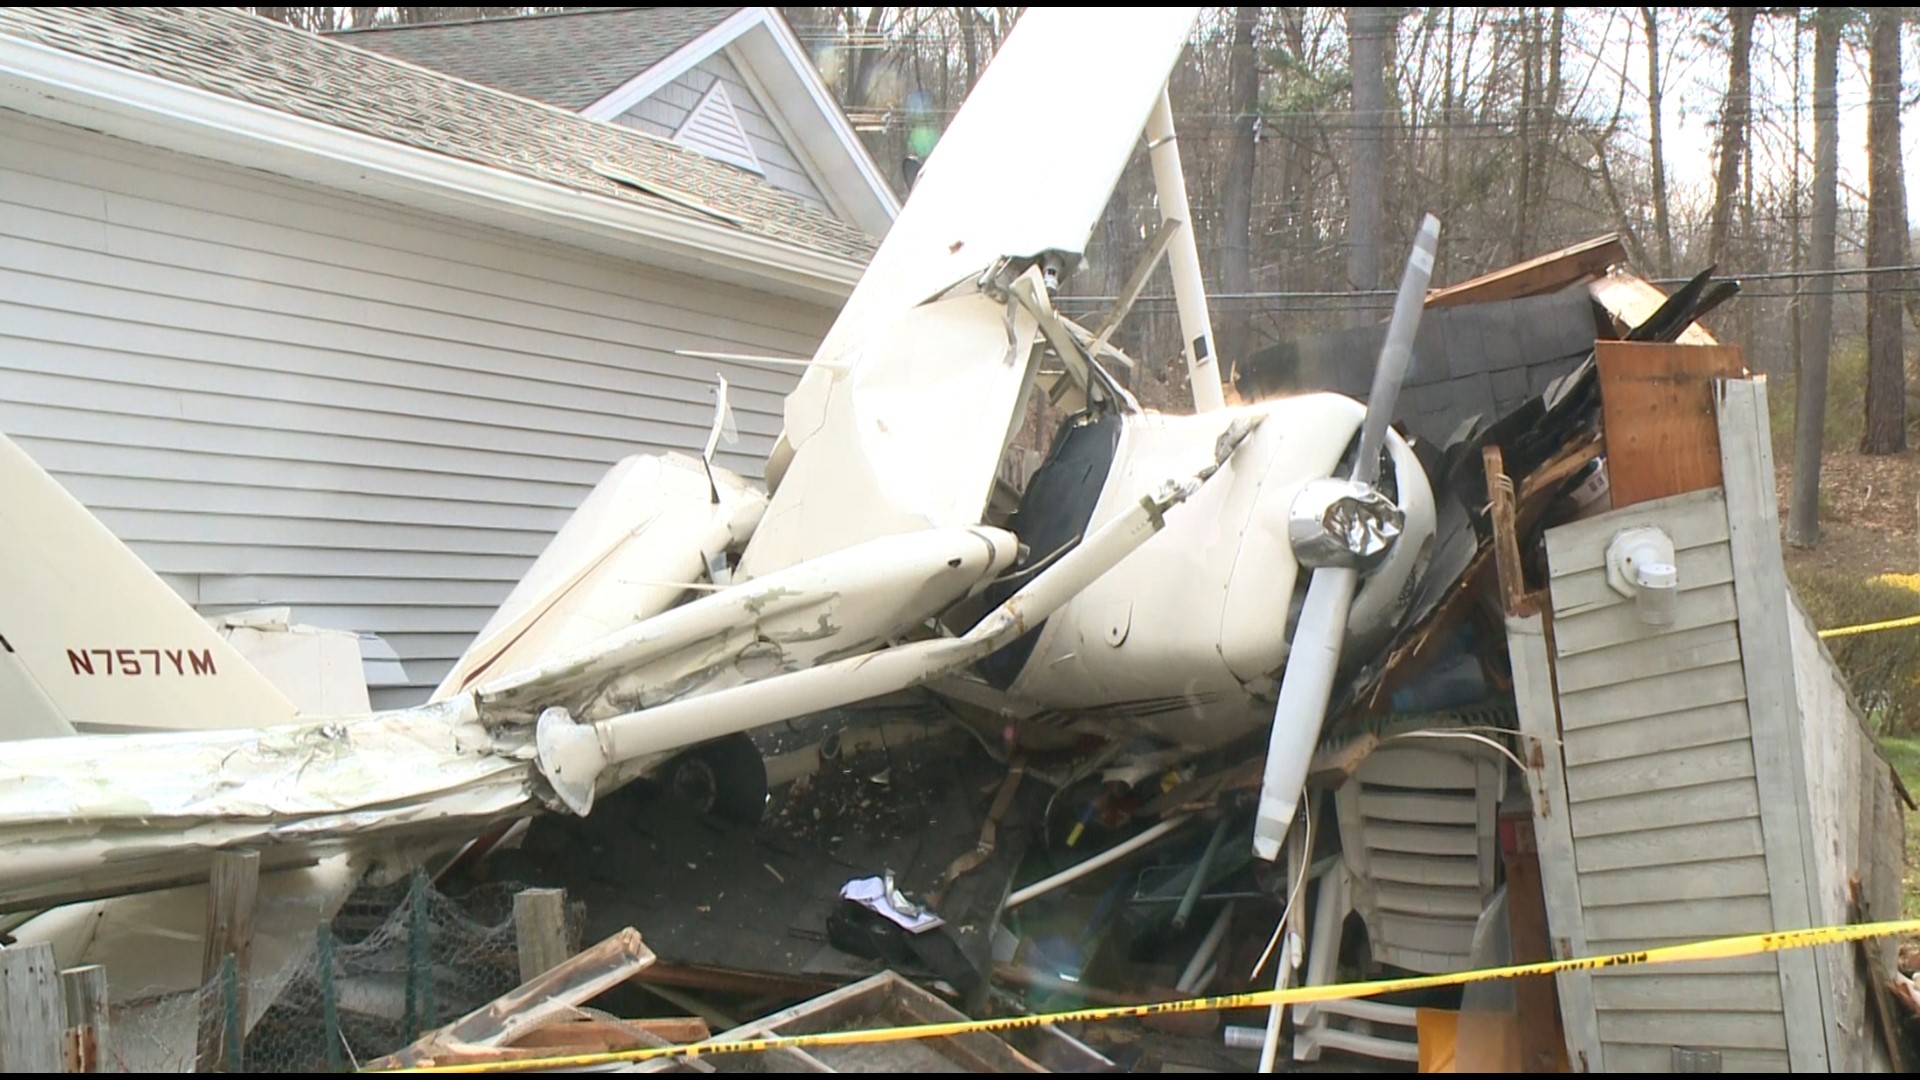 In the middle of a Danbury neighborhood sits houses, pools, and after Monday night, a small plane wreckage in a backyard.